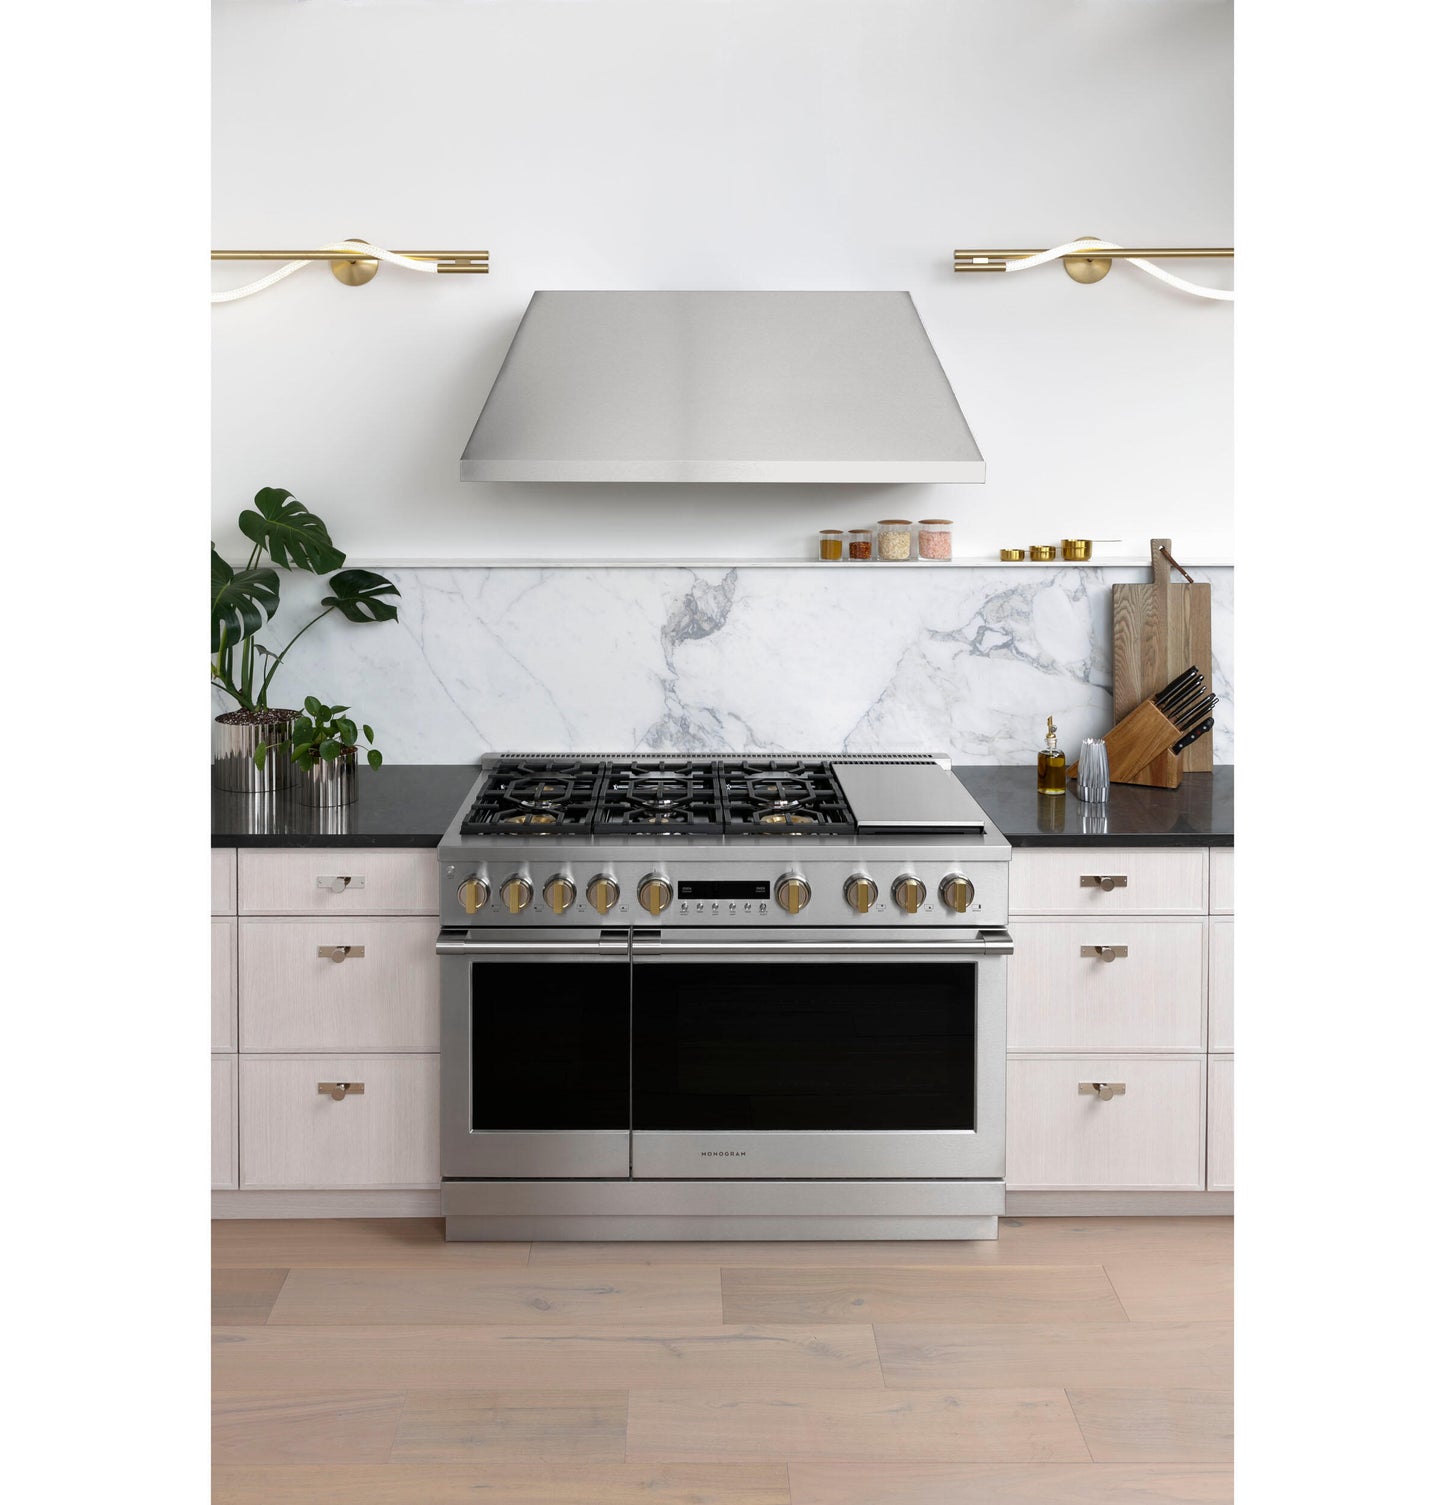 Monogram ZGP486NDTSS Monogram 48" All Gas Professional Range With 6 Burners And Griddle (Natural Gas)